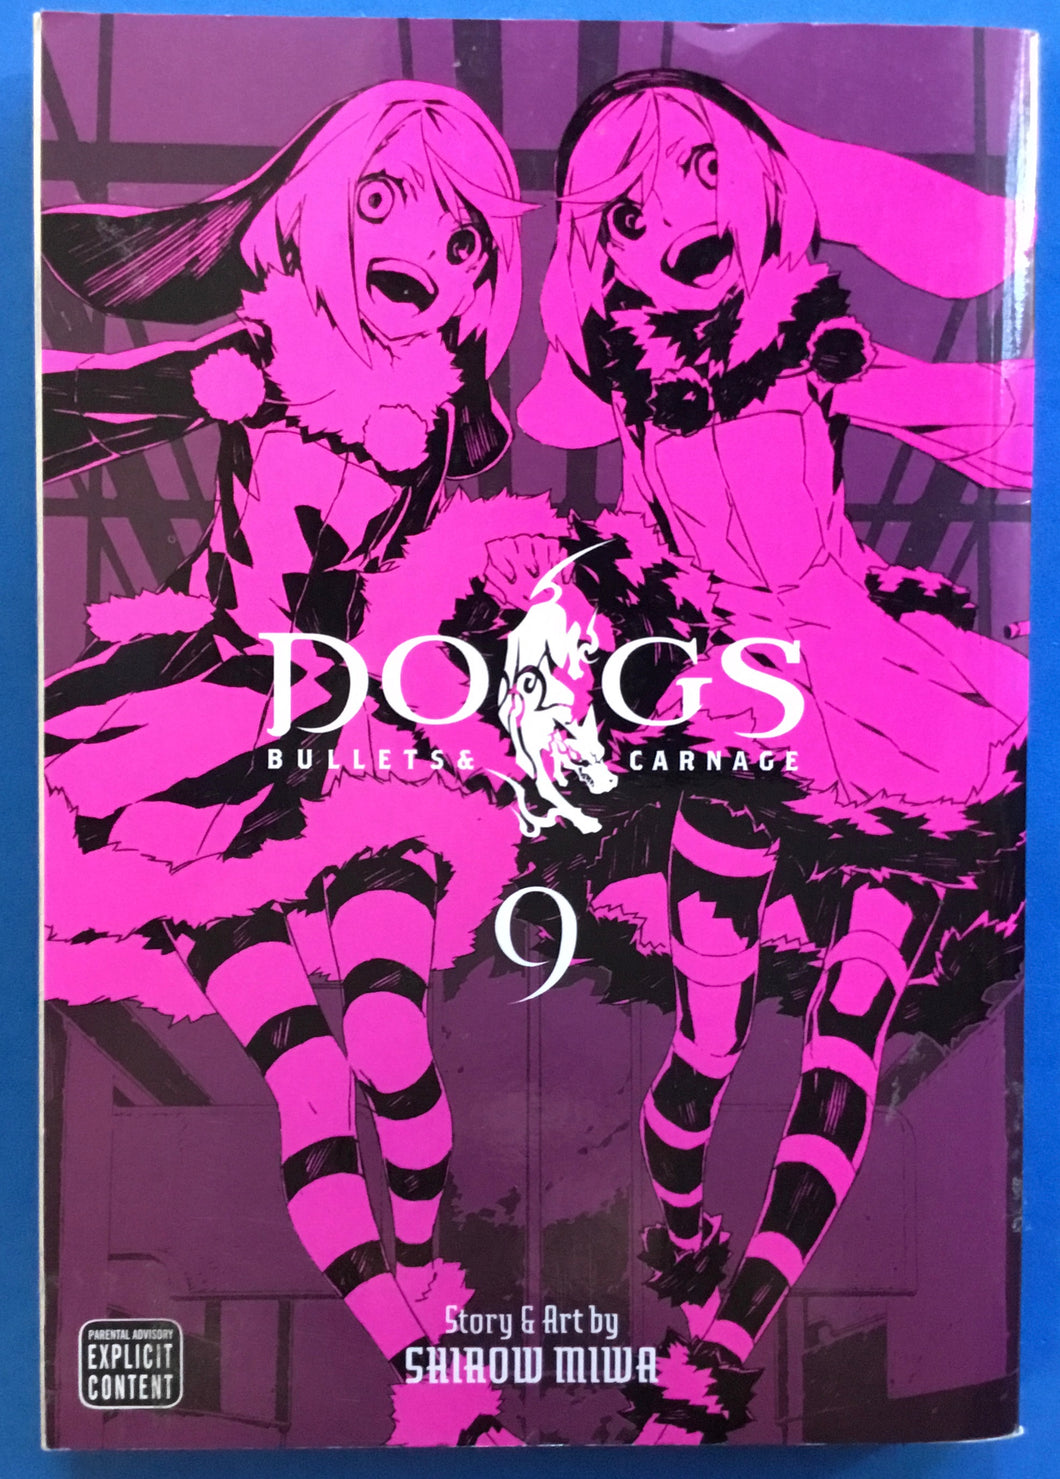 Dogs: Bullets & Carnage Volume 9 by Shirow Miwa 2015